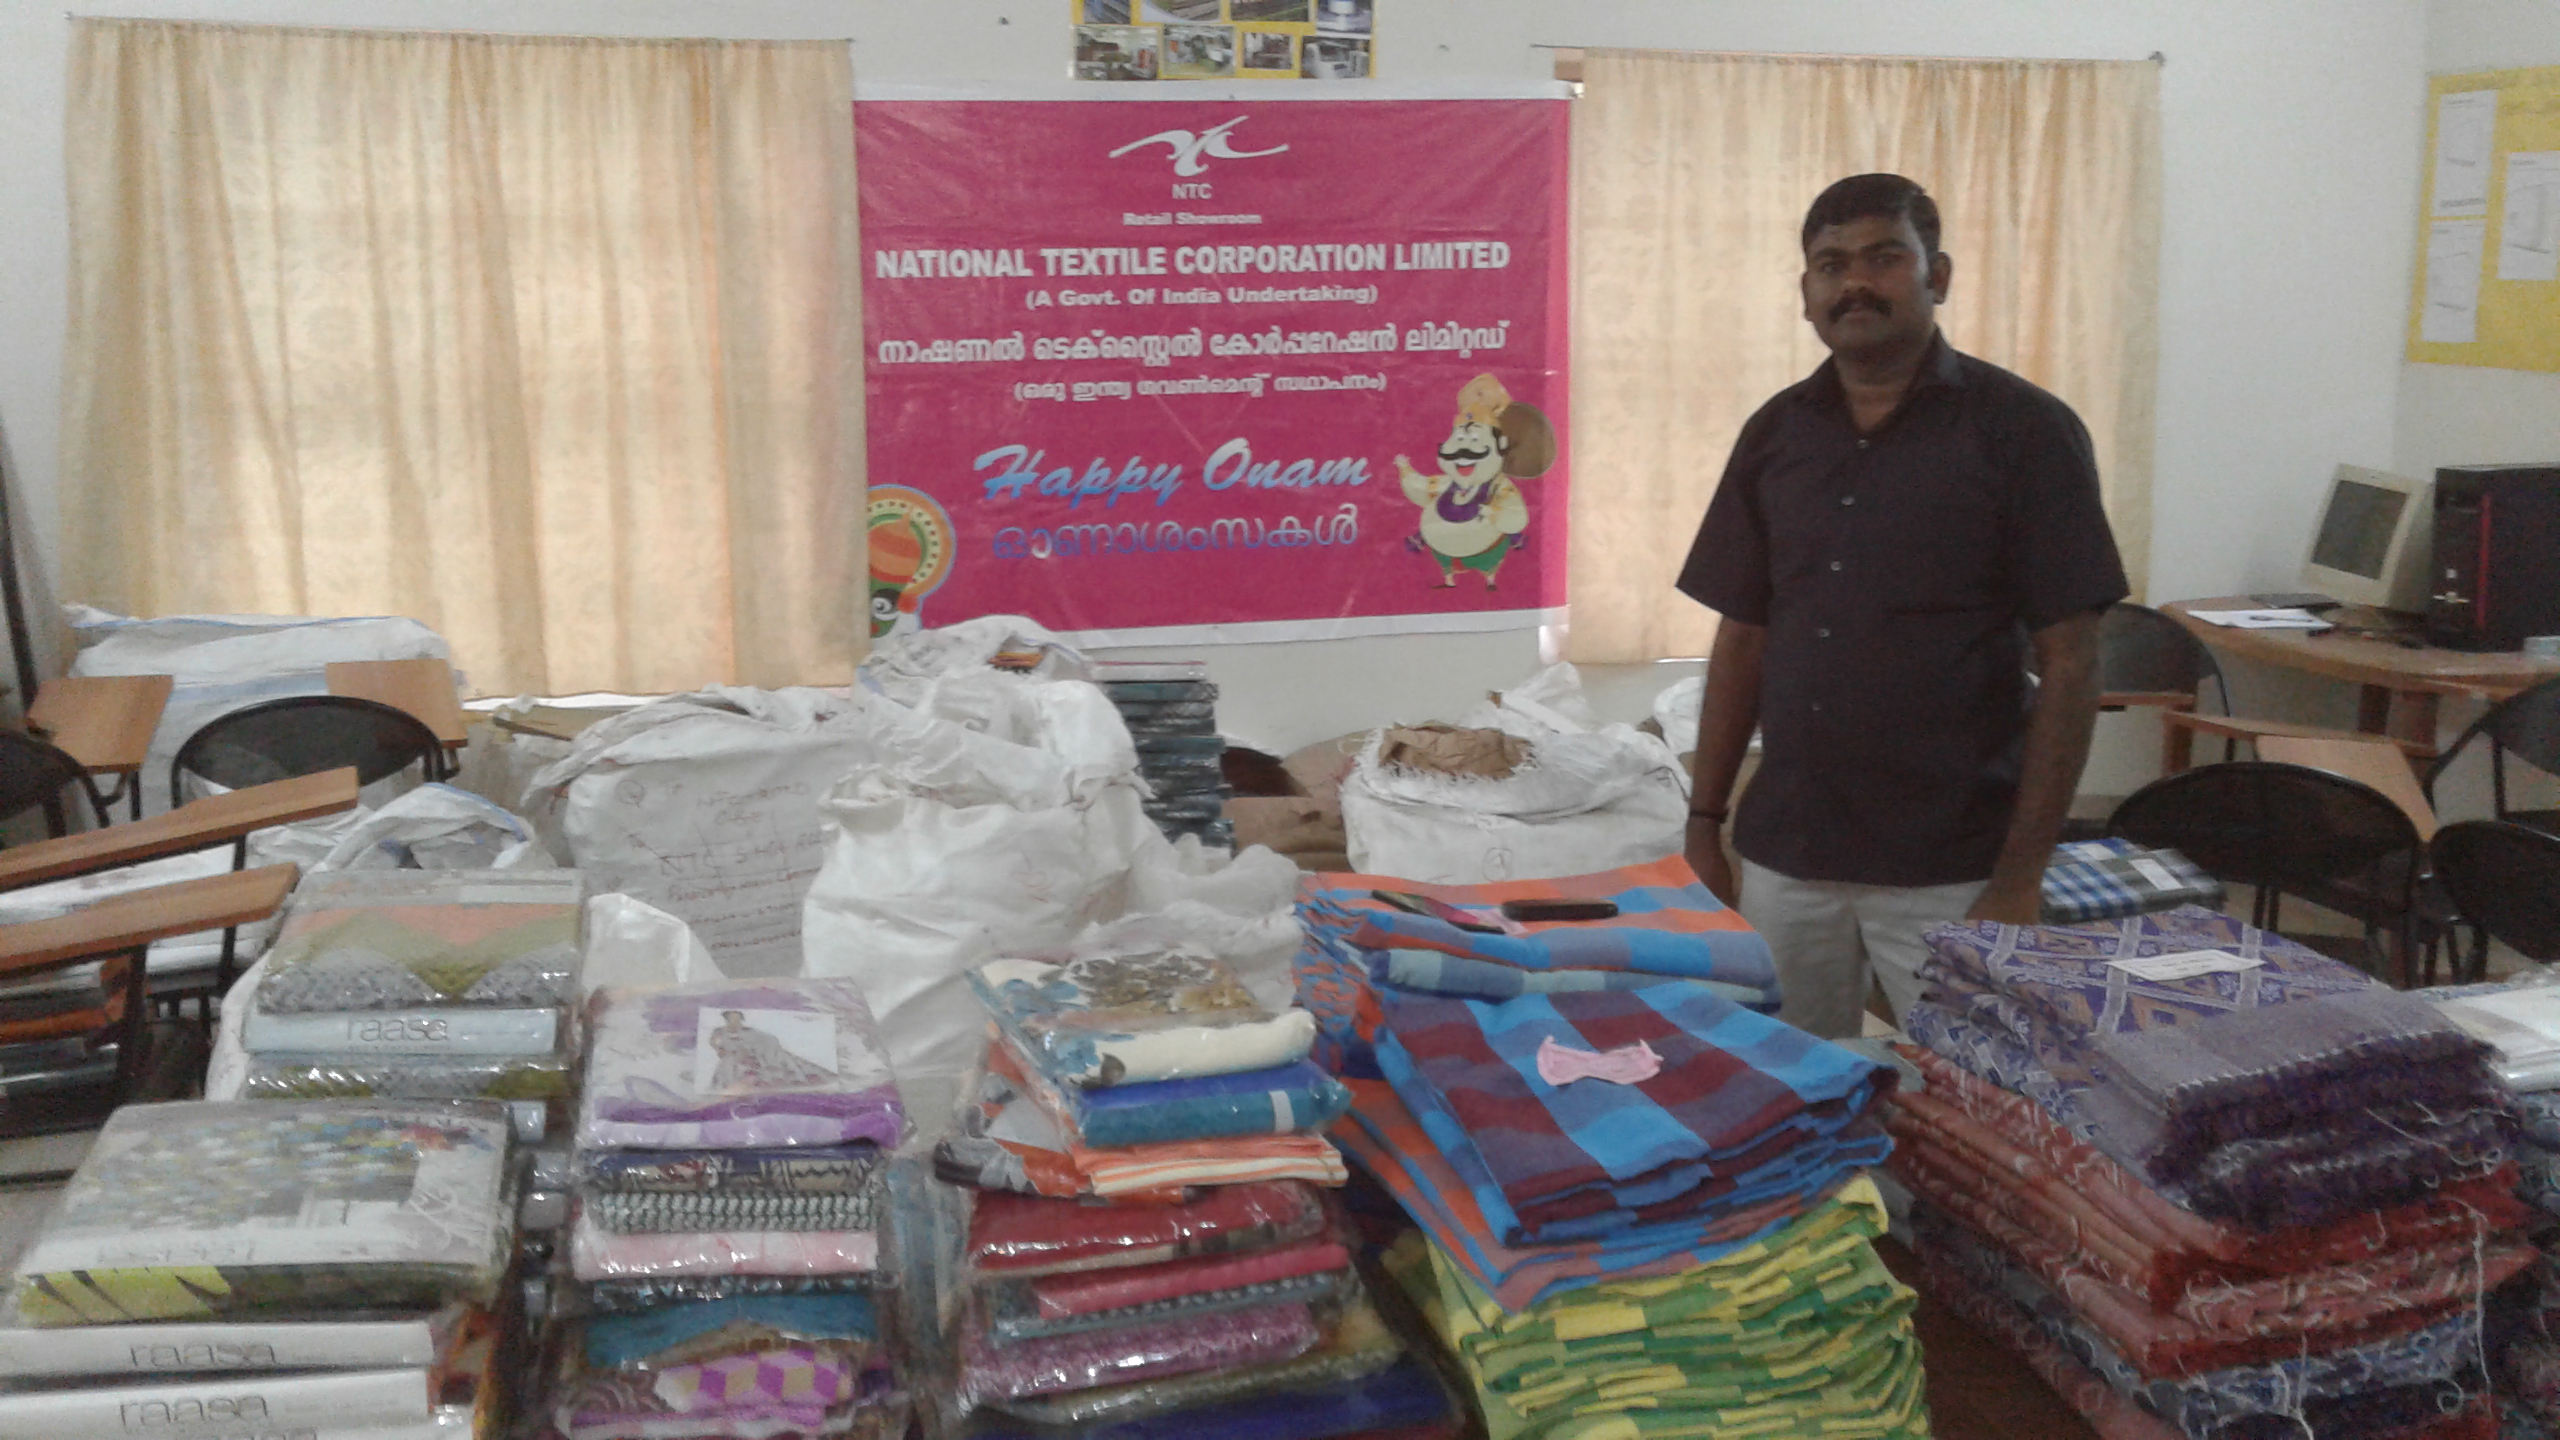 SRO and as desired by the Vijay Mohini Mills, Trivendrum , Kerala Lakshmi Mill, Thrissur, RMD/SRO conducted the Special sales counters at Vijaya Mohini Mills & Kerala Lakshmi Mill during the first and second week of Sept.2016 respectively